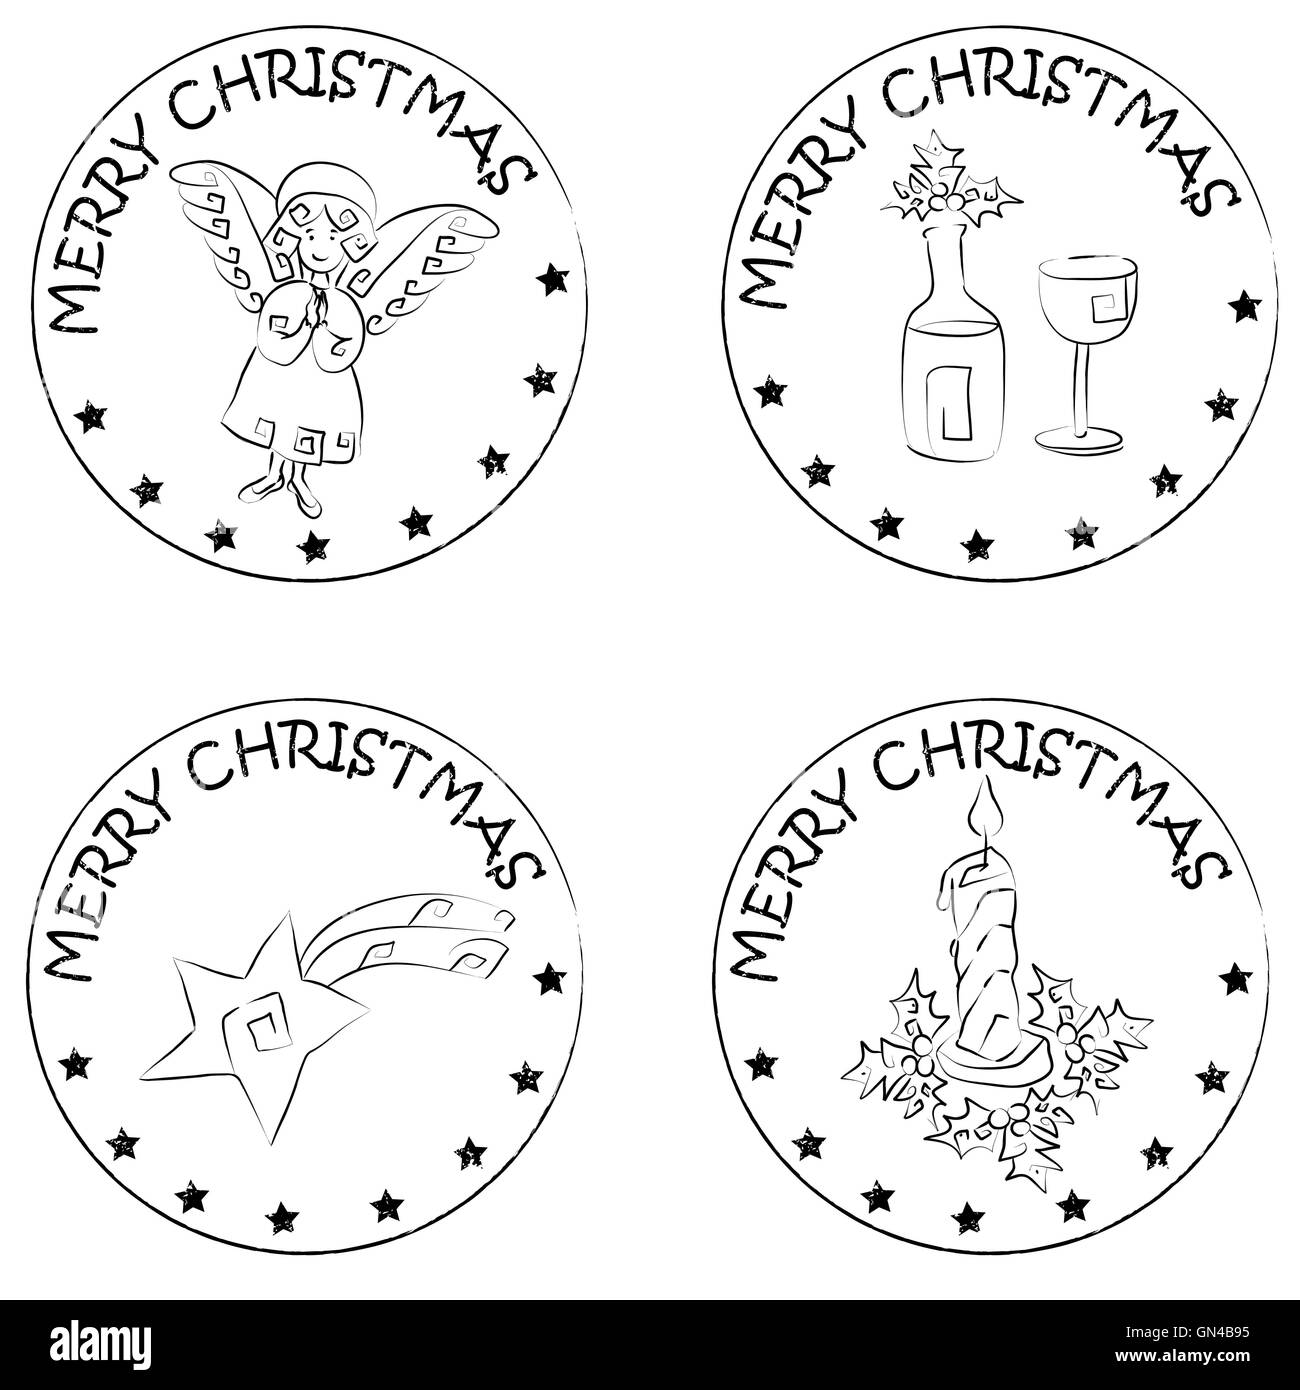 4 christmas coin stamps angel candle star wine Stock Photo